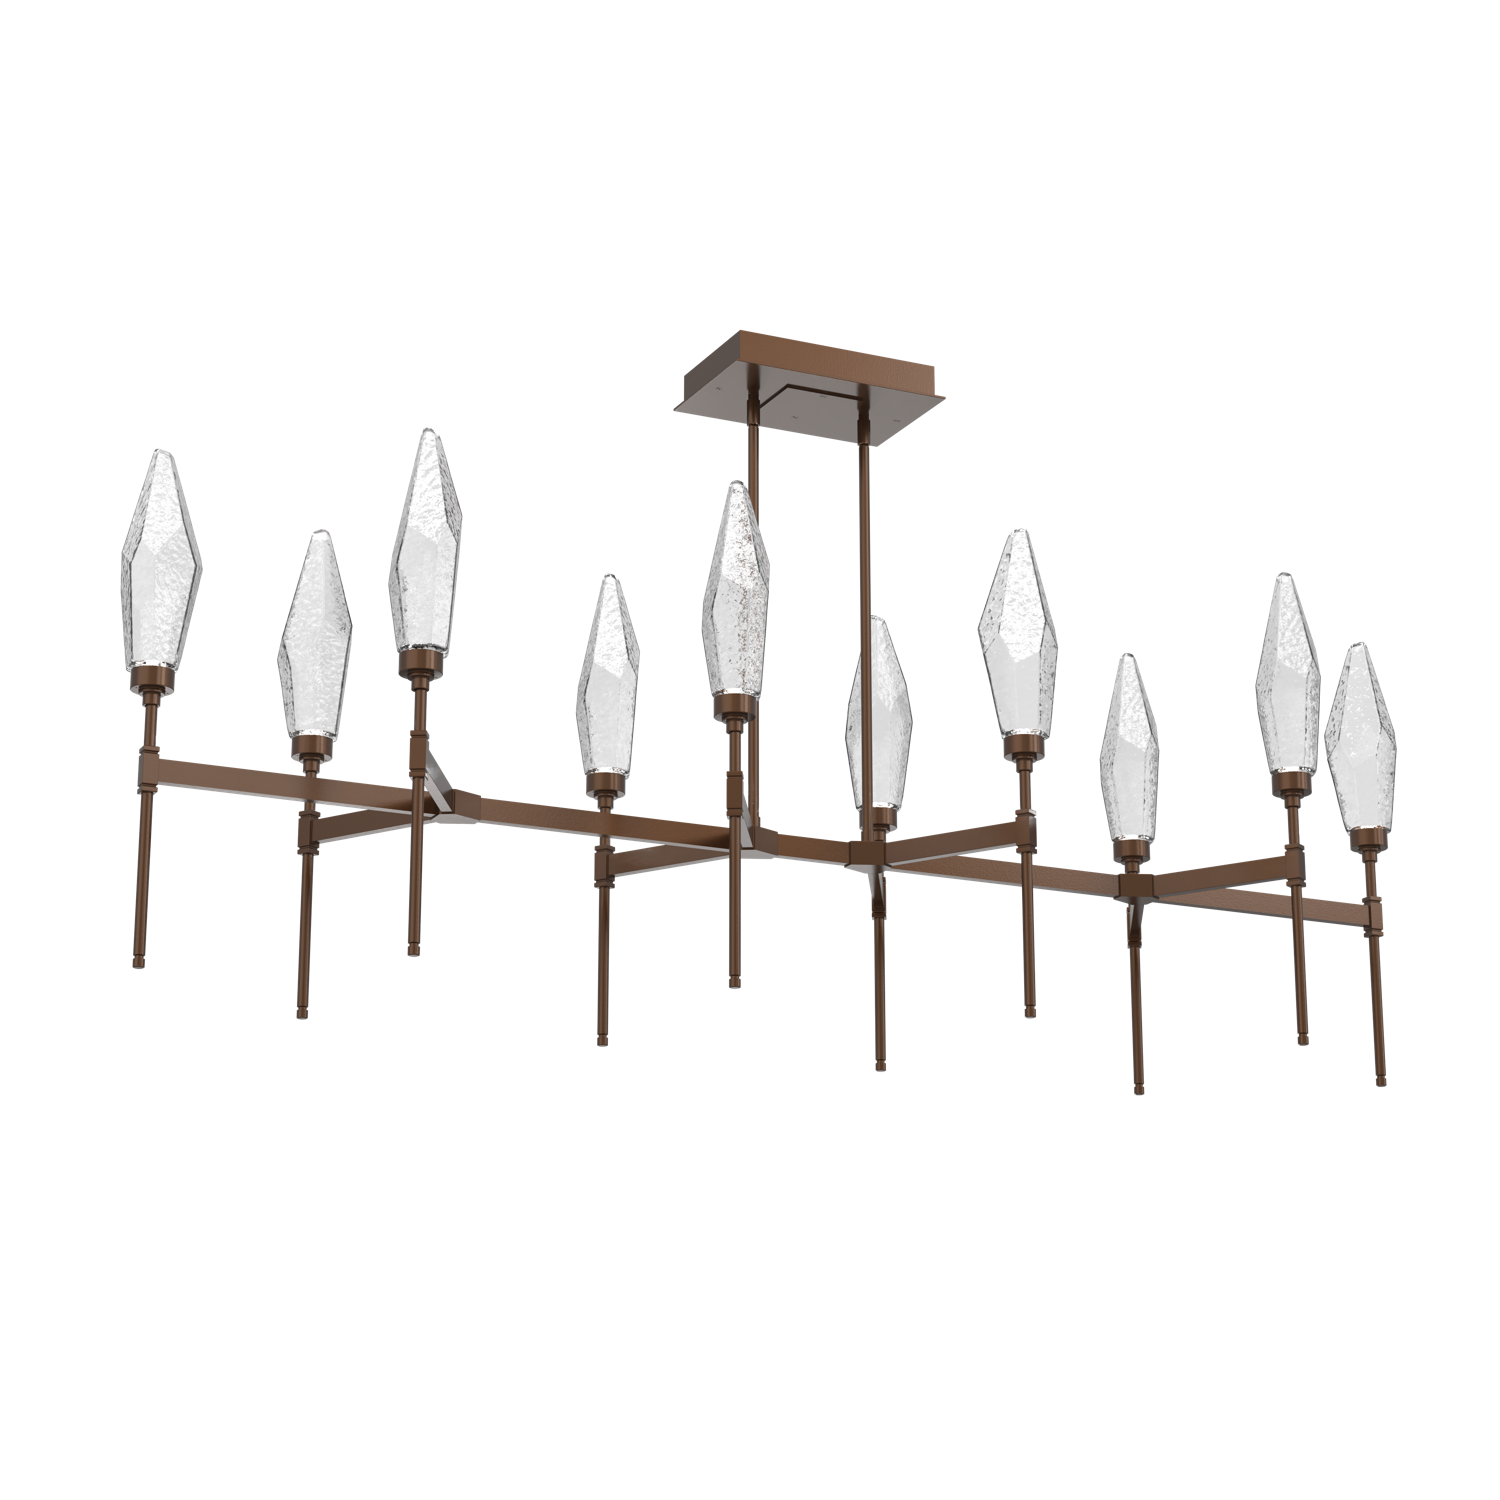 PLB0050-67-BB-CC-Hammerton-Studio-Rock-Crystal-67-inch-linear-belvedere-chandelier-with-burnished-bronze-finish-and-clear-glass-shades-and-LED-lamping